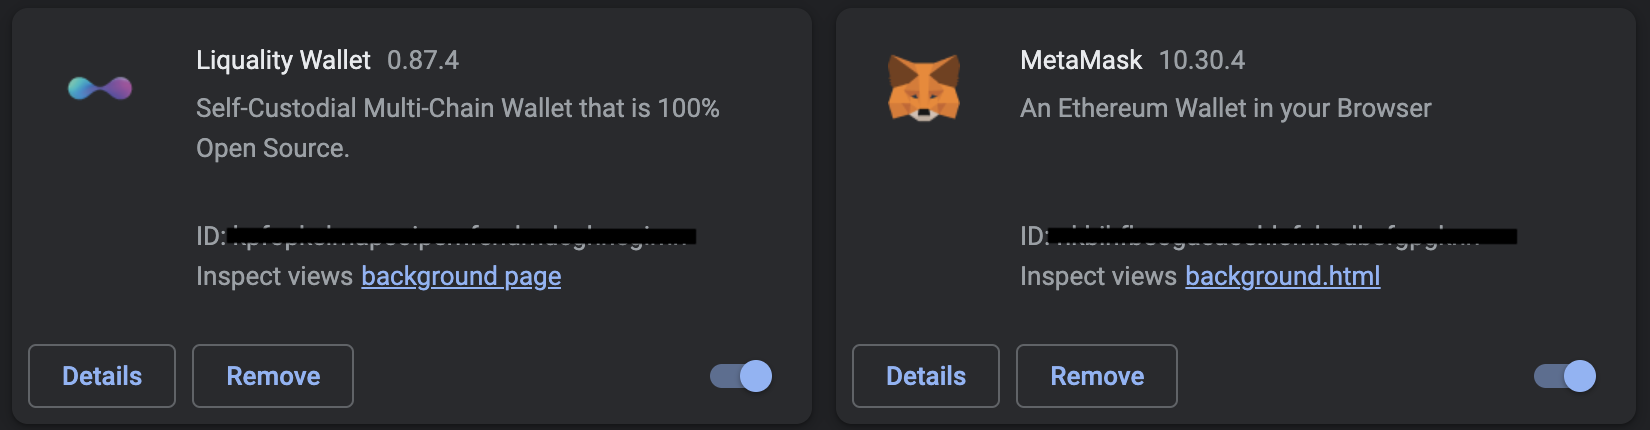 MetaMask and Liquality enabled